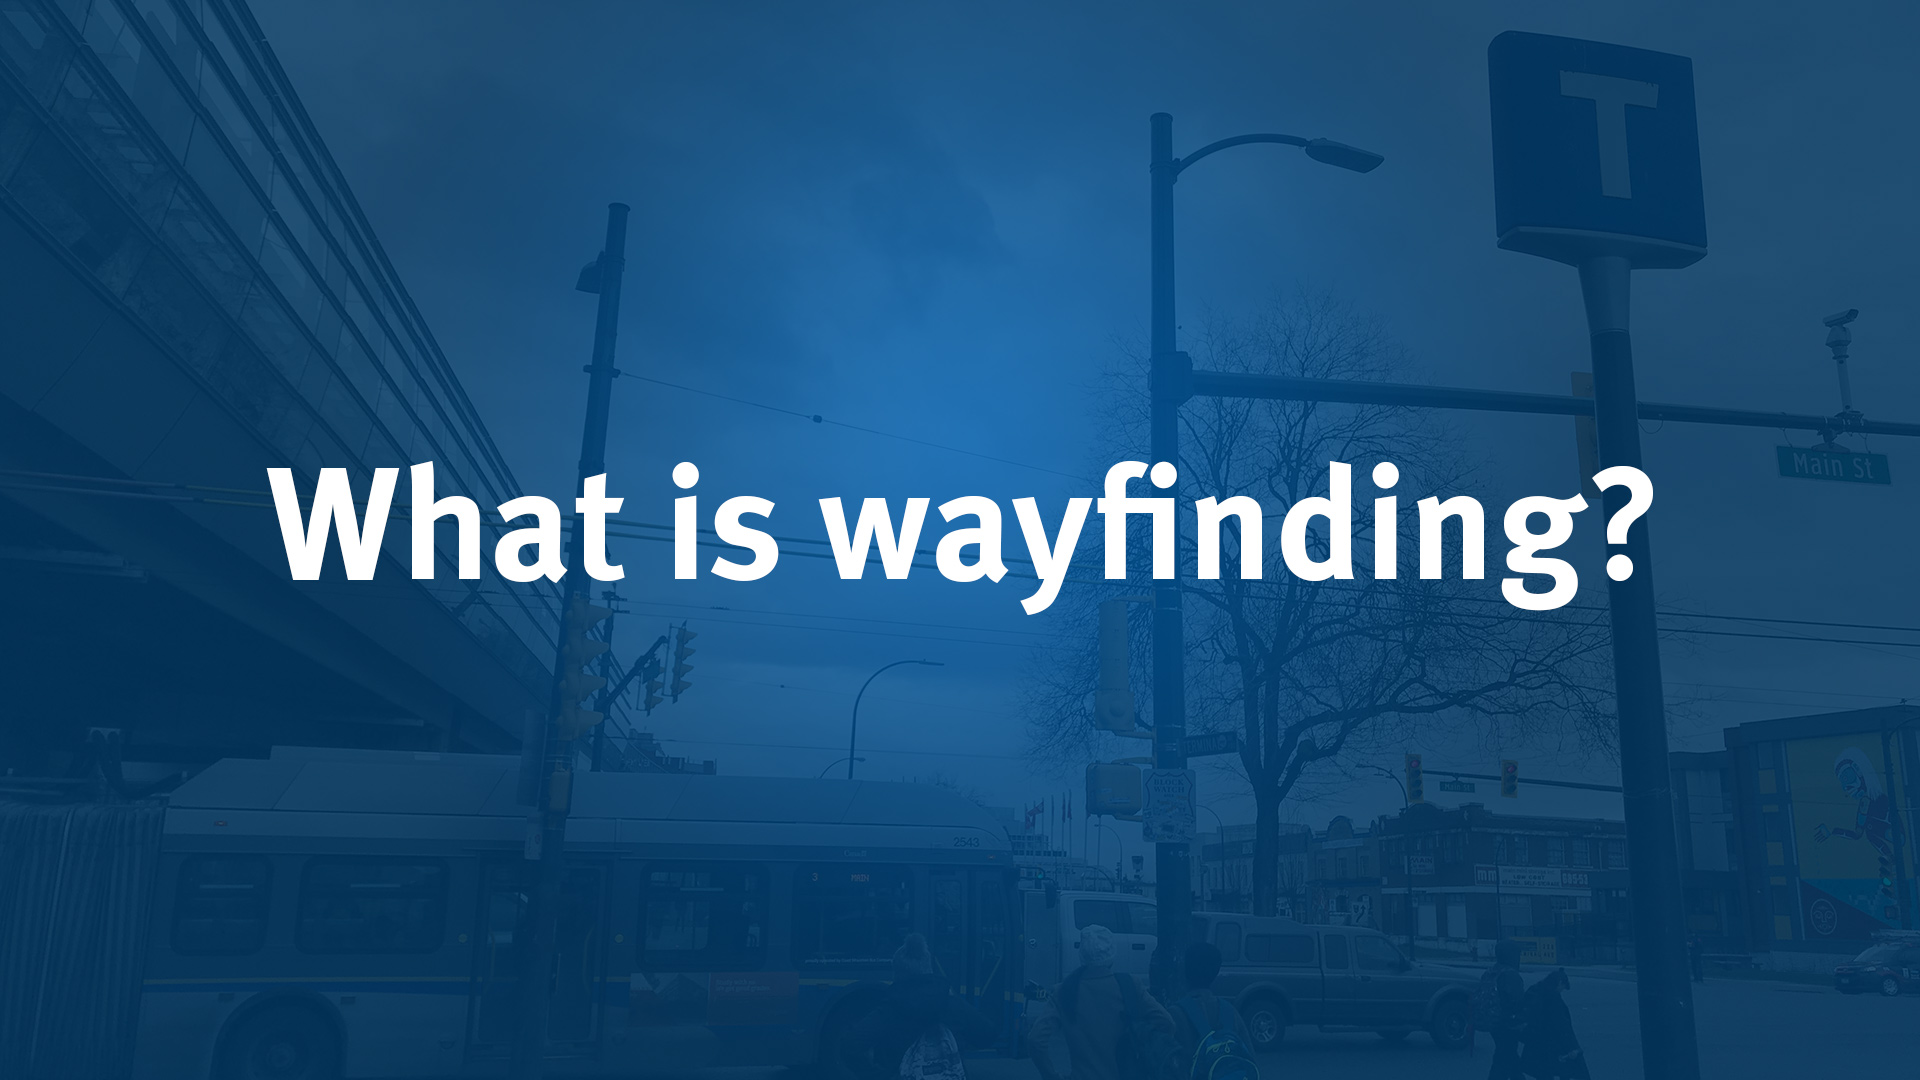 What is wayfinding?